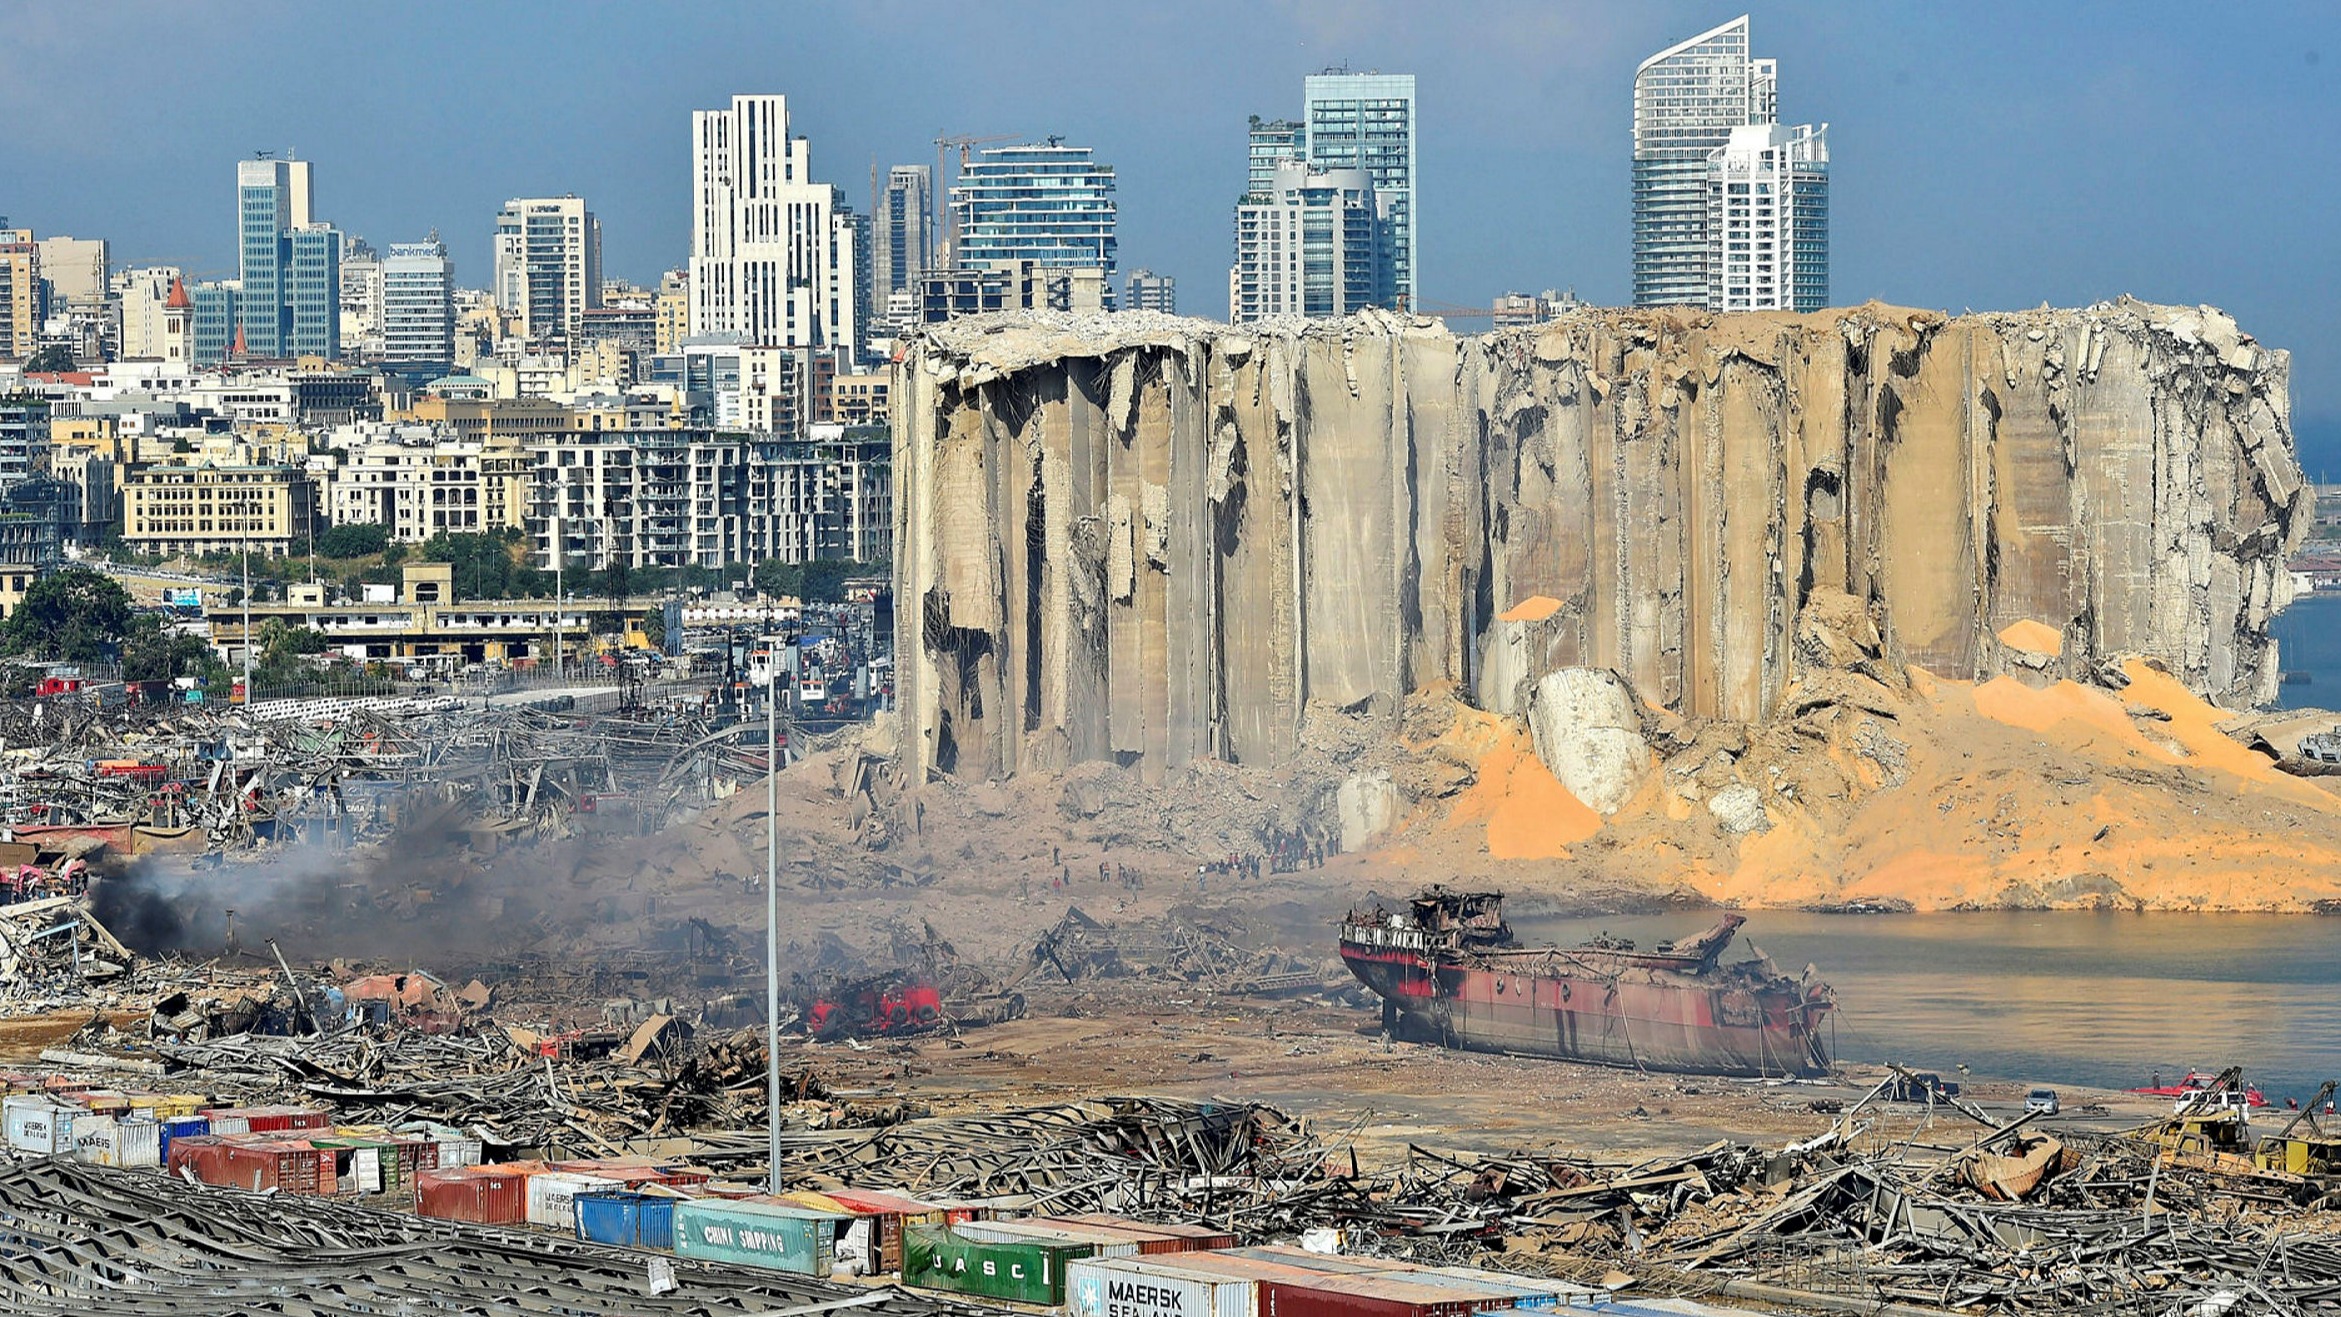 Beirut explosion deepens the tragedy of Lebanon | Financial Times